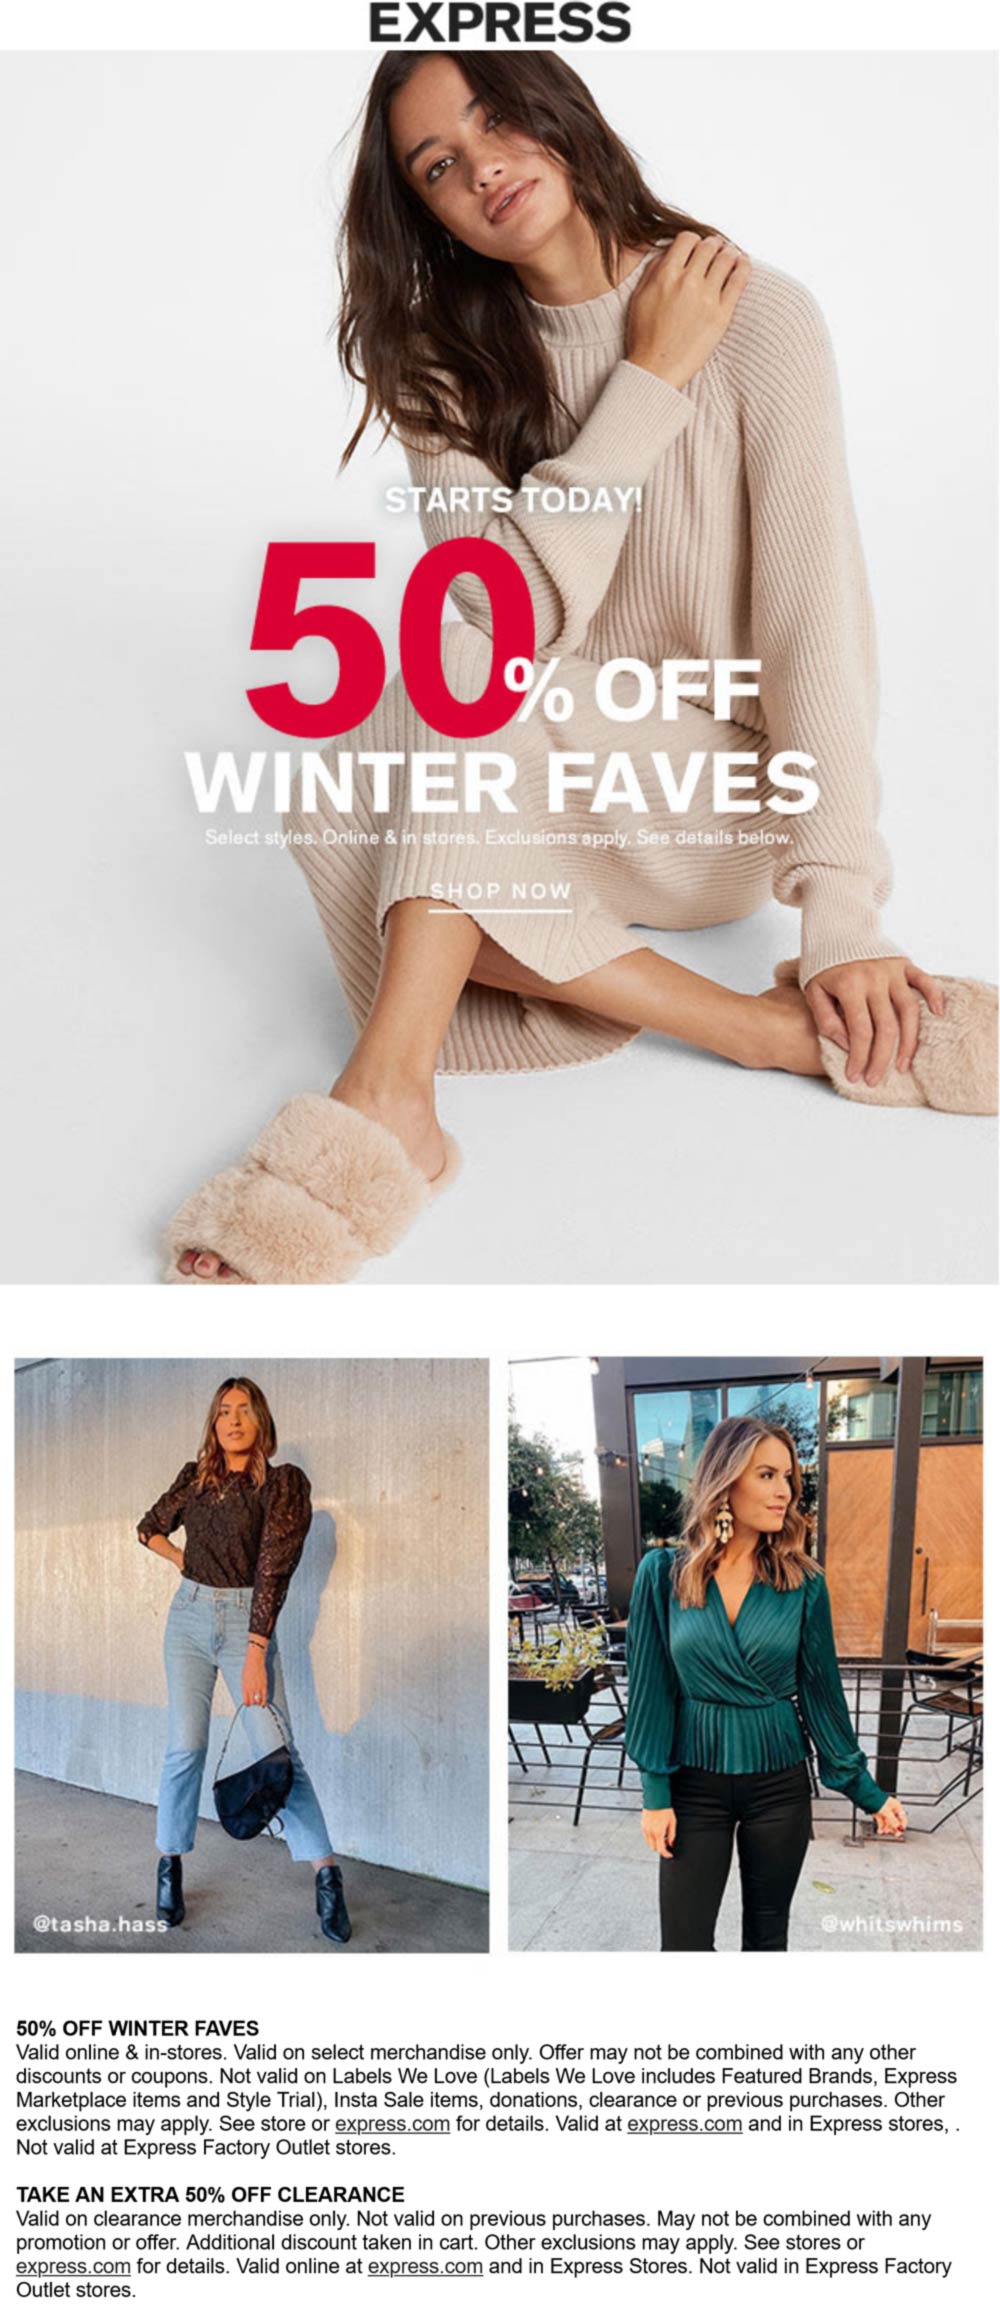 Express stores Coupon  50% off winter favorites & clearance at Express, ditto online #express 